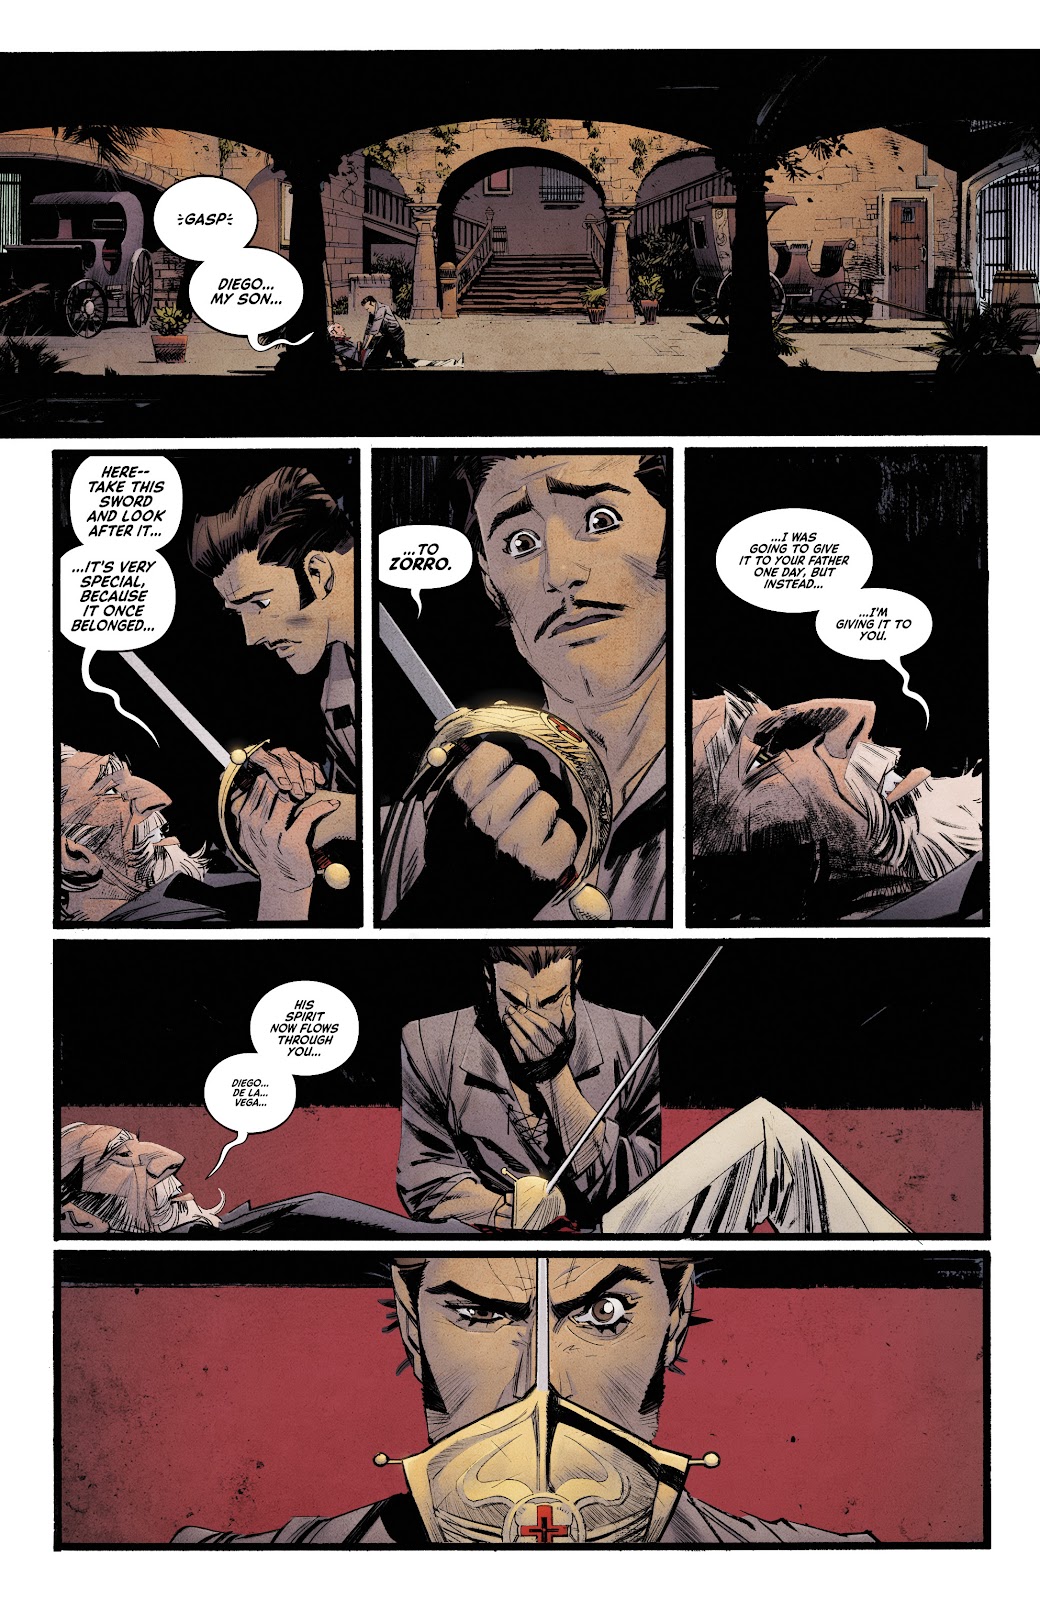 Zorro: Man of the Dead issue 1 - Page 18